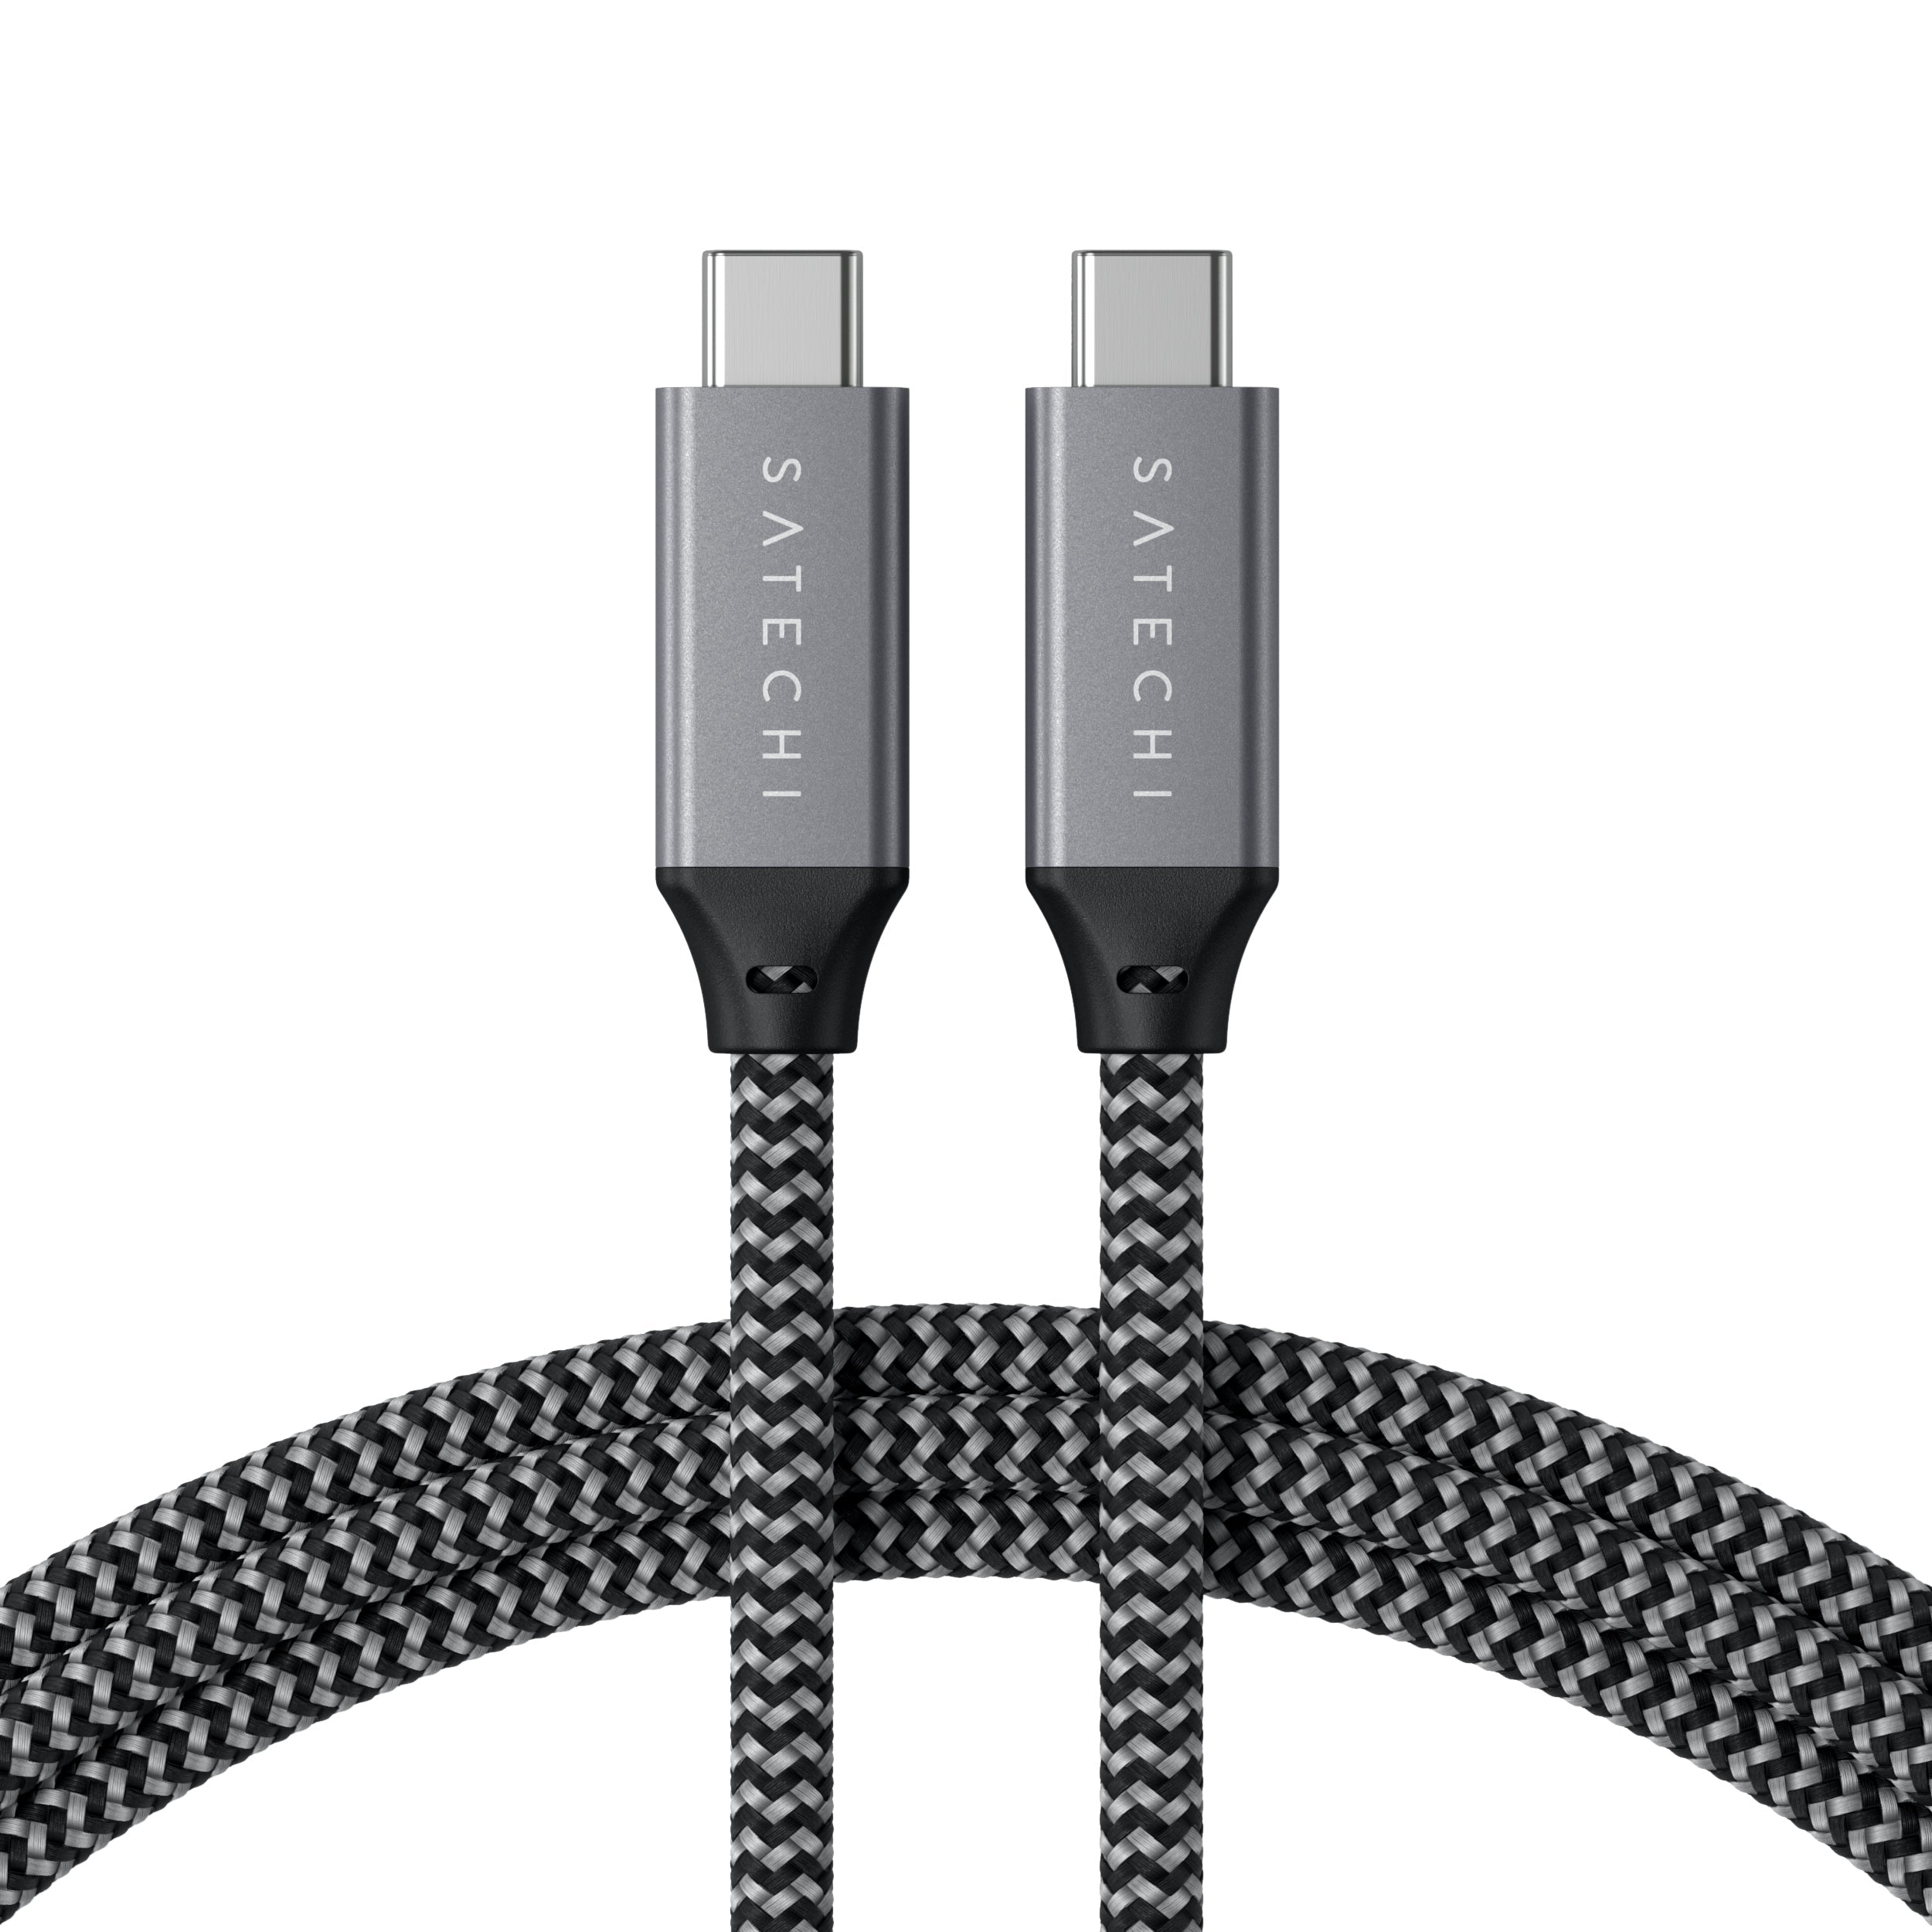 https://cdn.shopify.com/s/files/1/1520/4366/products/usb4-c-to-c-cable-usb-c-satechi-974876.jpg?v=1646887542